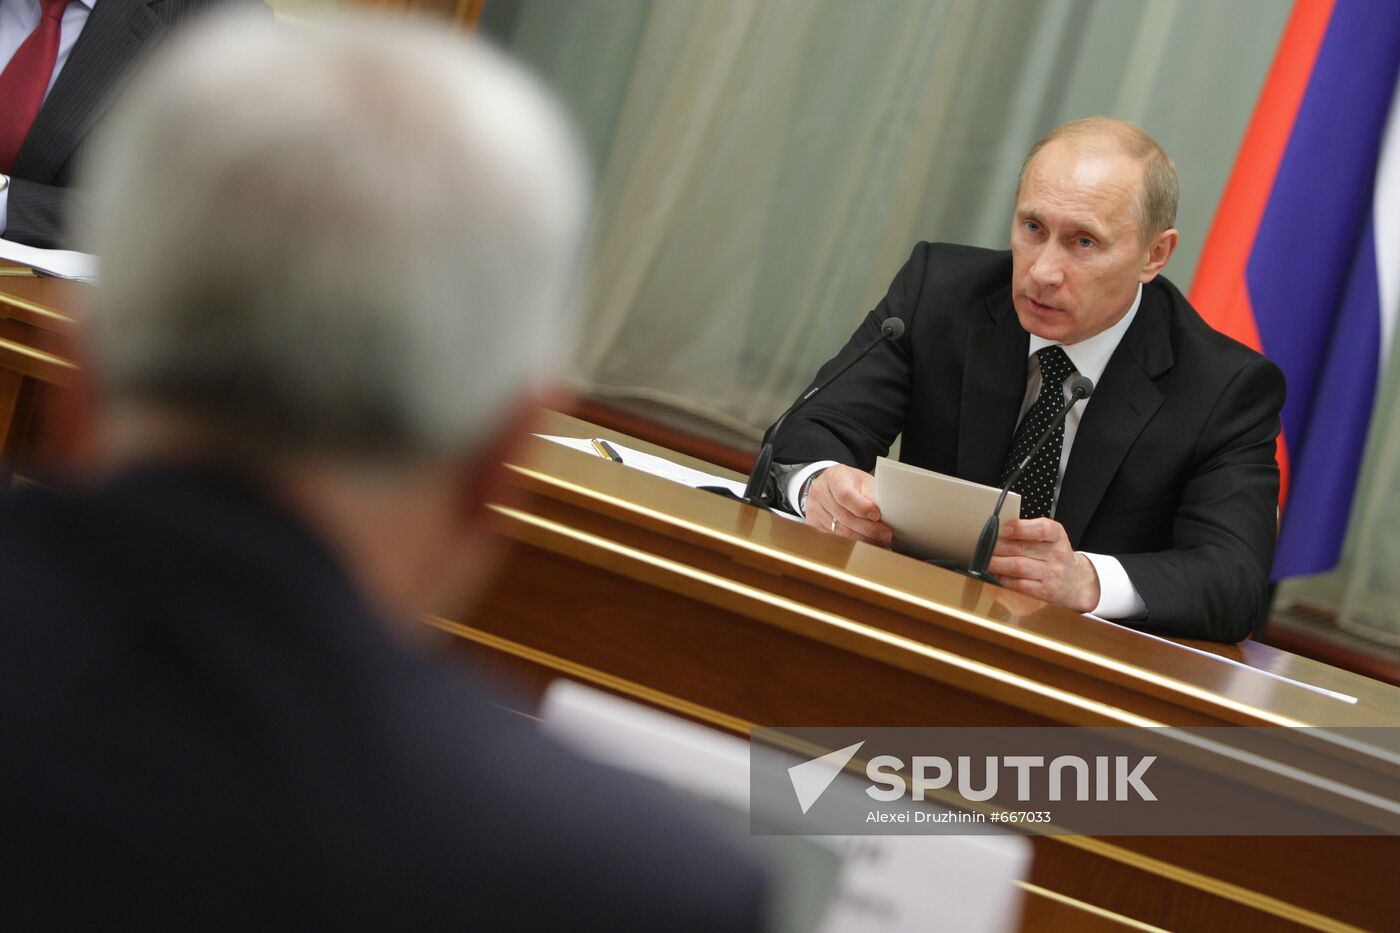 Vladimir Putin meets with heads of RSPP